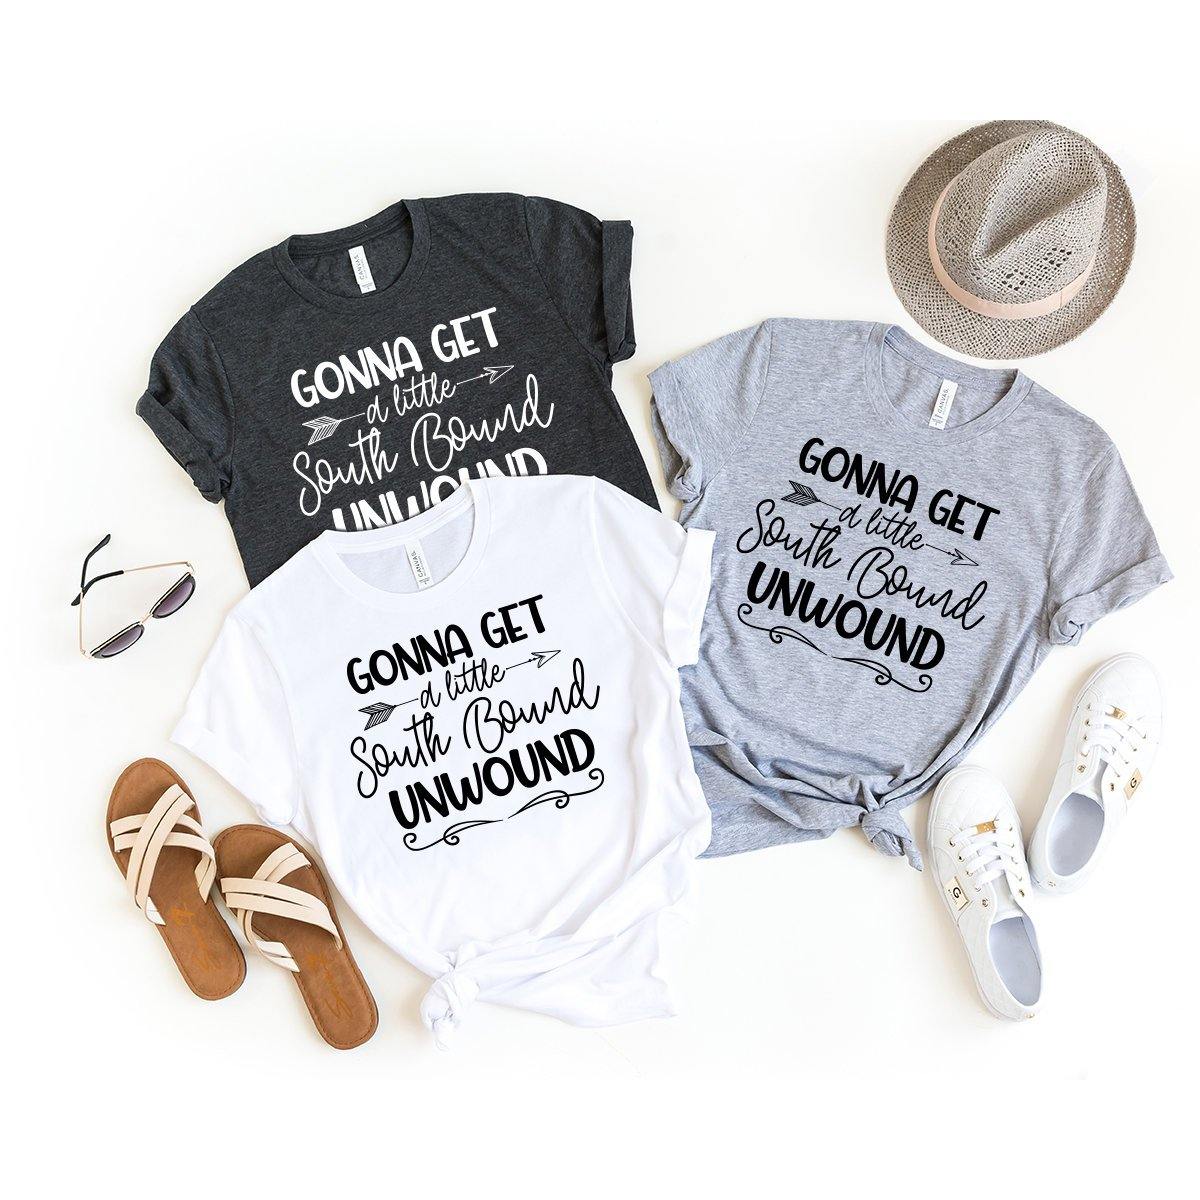 Country Girl Shirt, Western Girl Shirt, Cowgirl Shirt, Southern Girl Shirt, Gonna Get A Little South Bound Unwound Shirt, Southern Tee - Fastdeliverytees.com